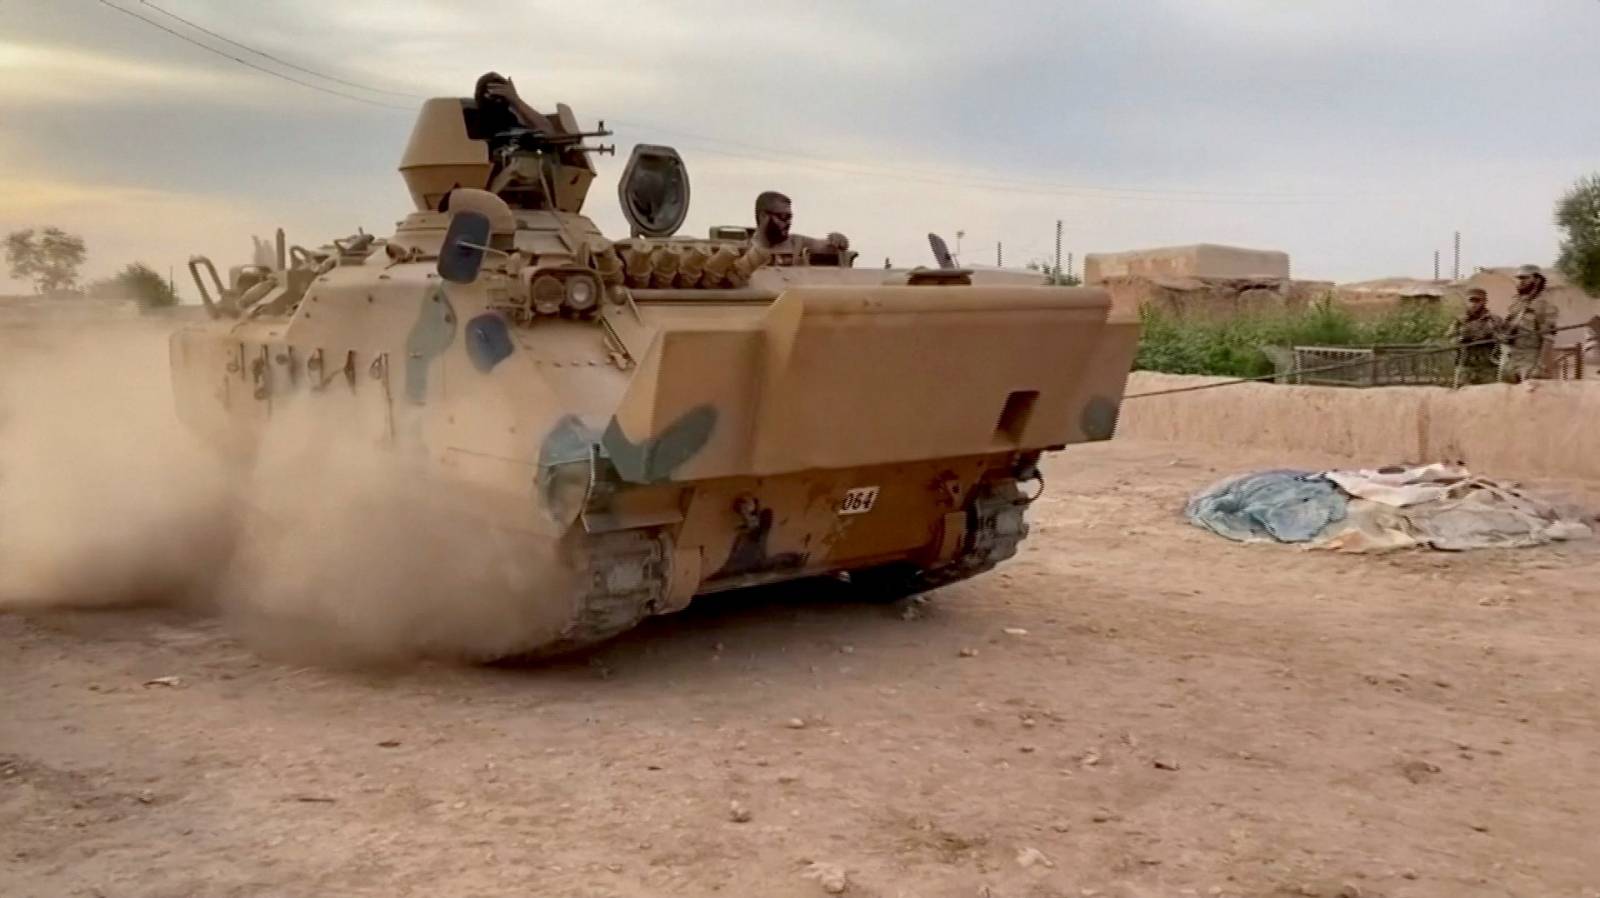 Still image from video shows Syrian rebel fighters driving a tank through a field near Tal Abyad